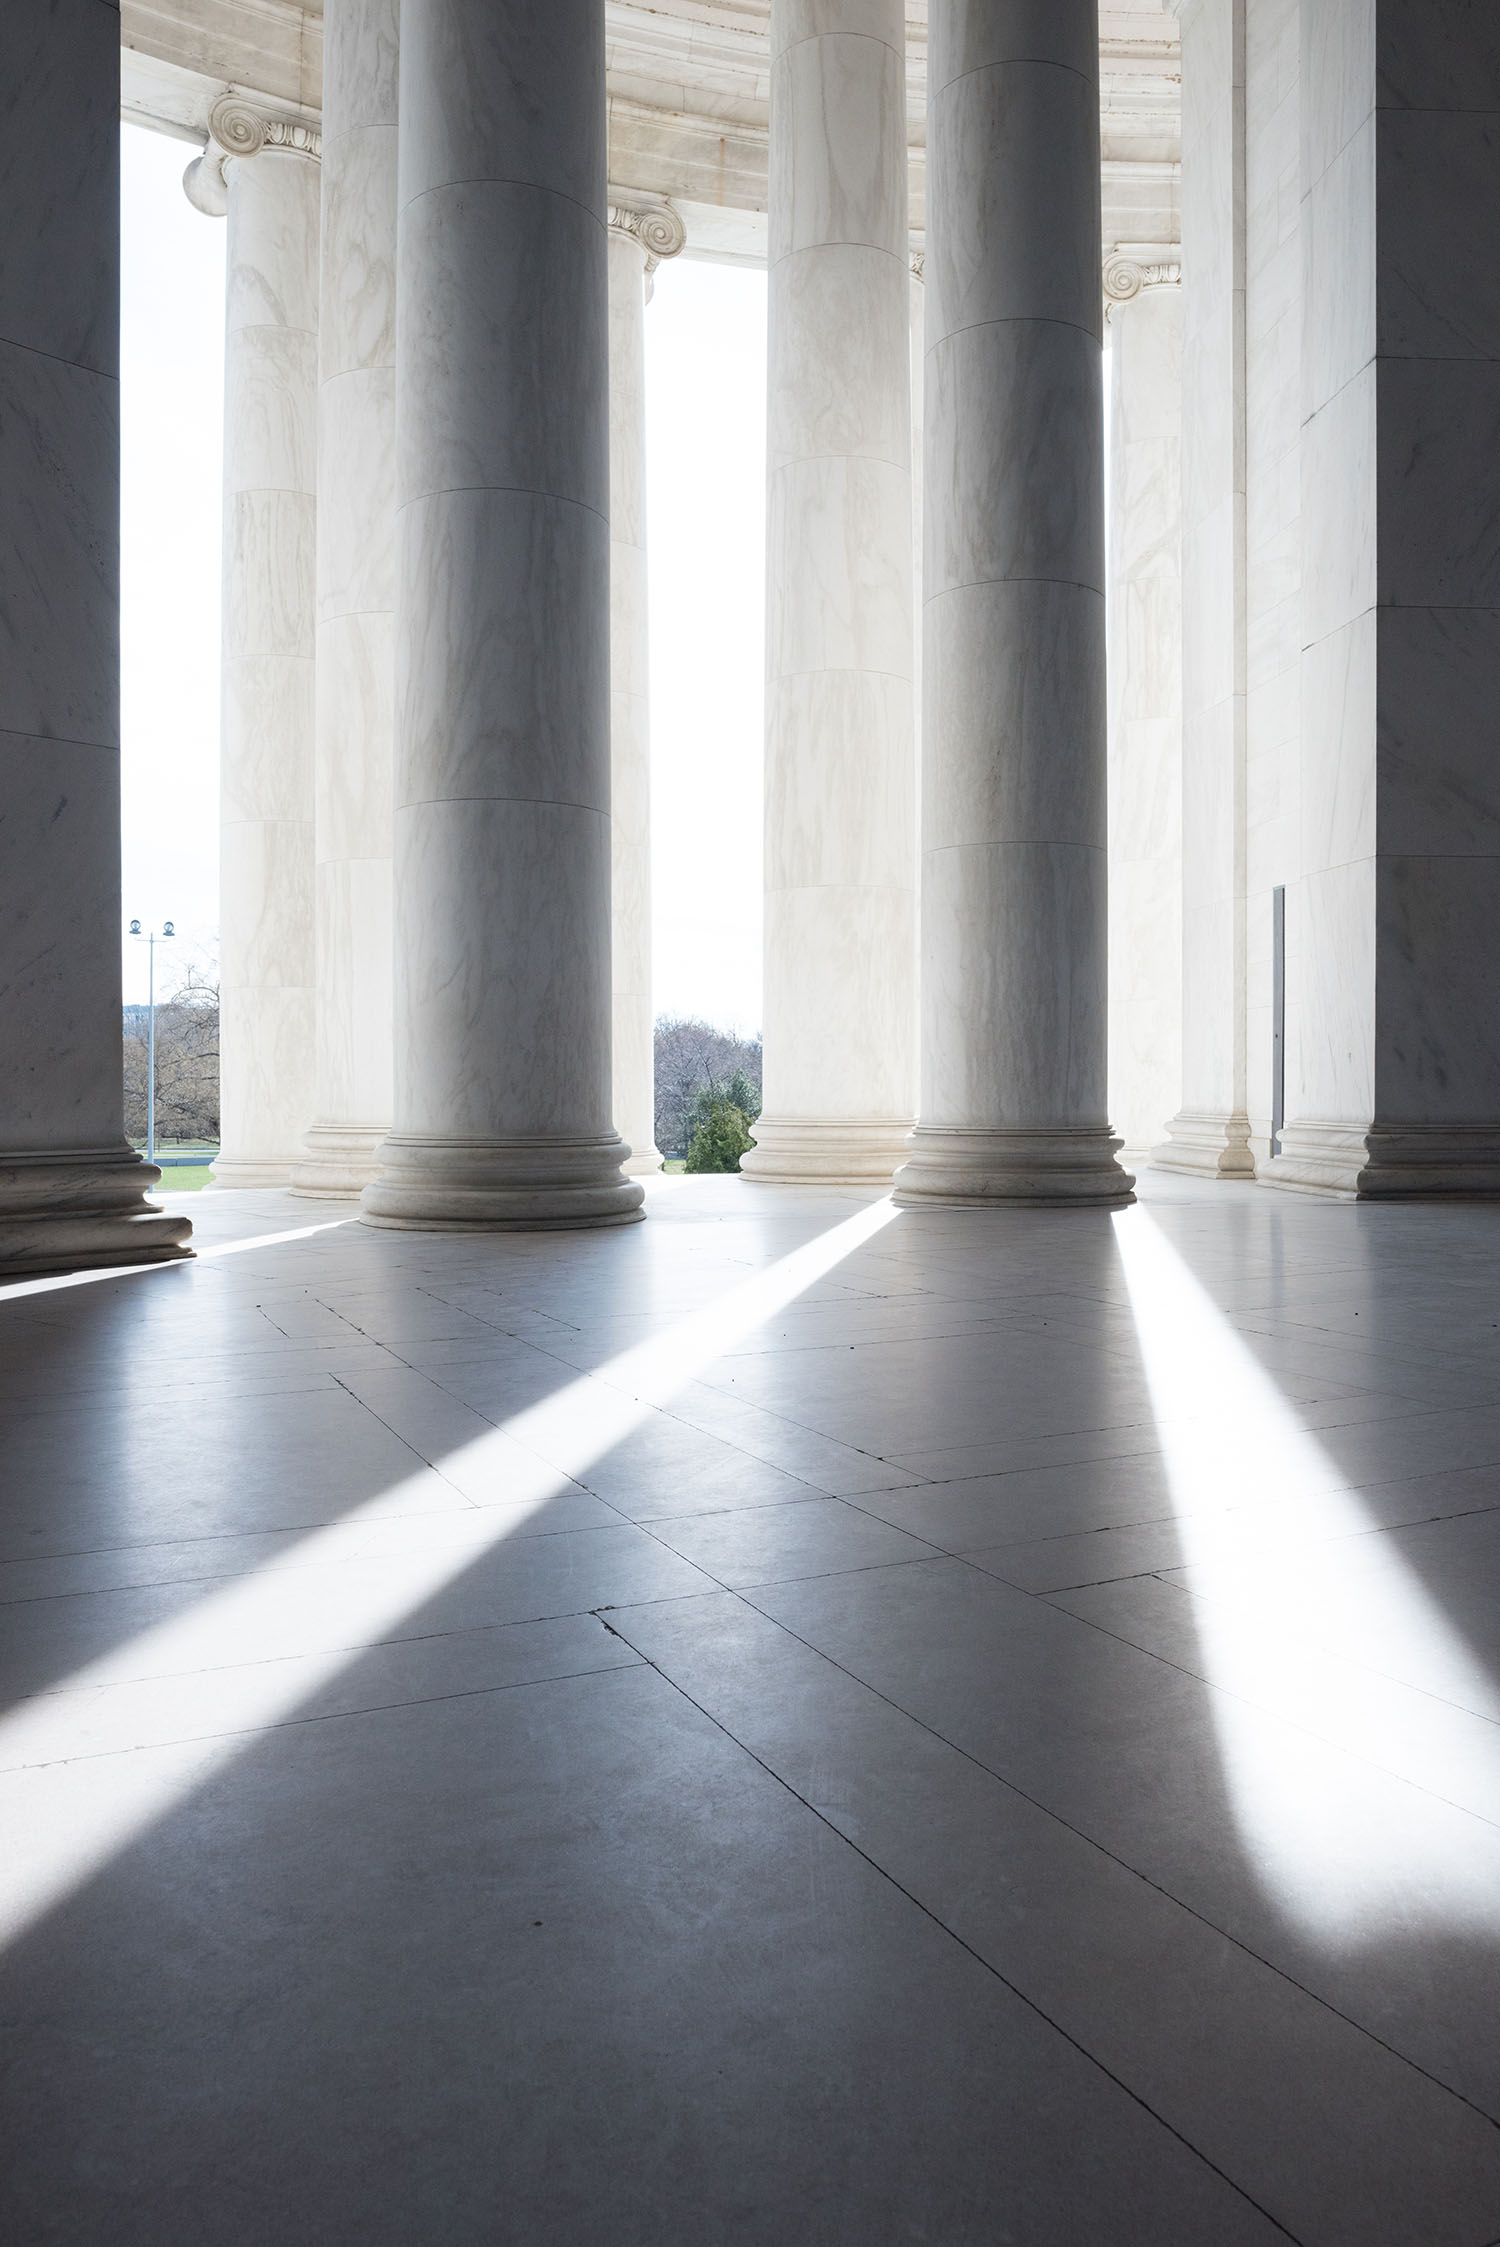 Columns of sunlight at the Jefferson Memorial in Washington DC, as photographed by top travel blogger Cee Fardoe of Coco & Vera